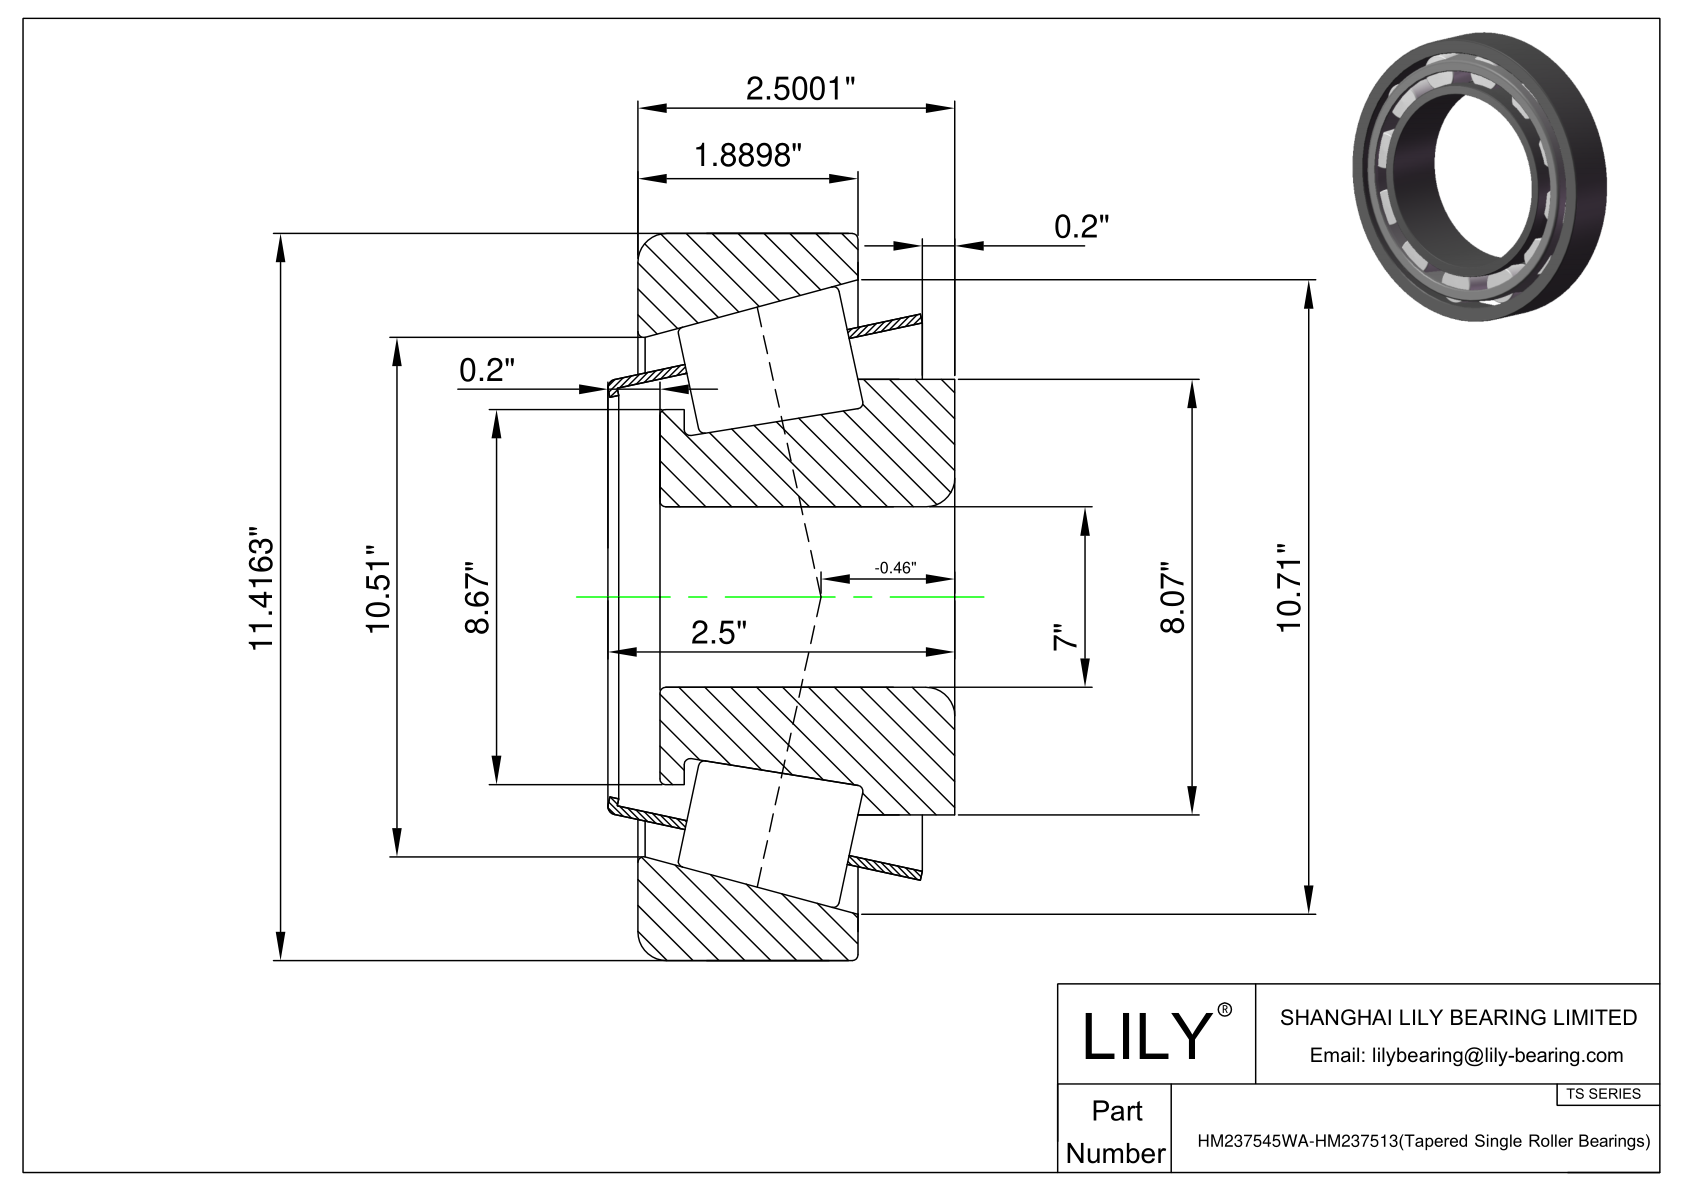 HM237545WA-HM237513 TS (Tapered Single Roller Bearings) (Imperial) cad drawing